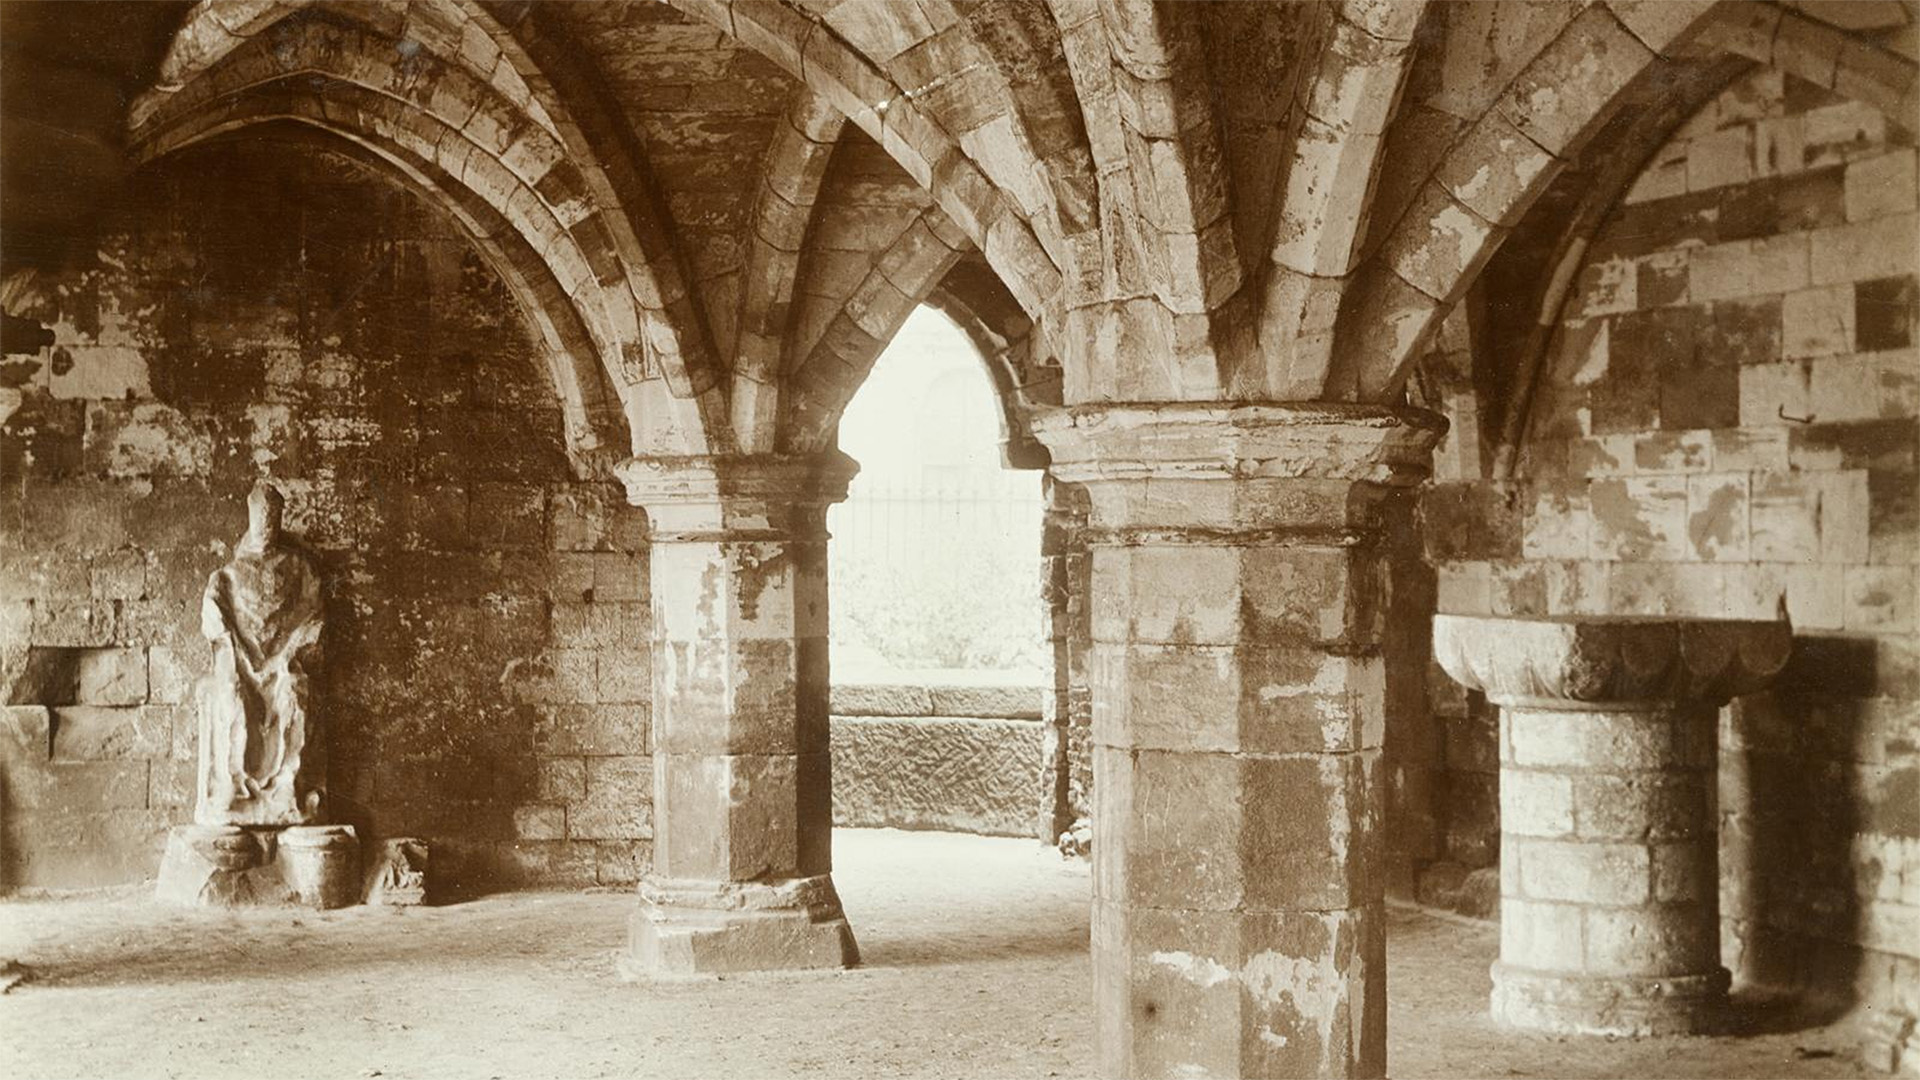 A view of the undercroft of St Leonard's Hospital, York with a statue of a seated figure adjacent to the wall